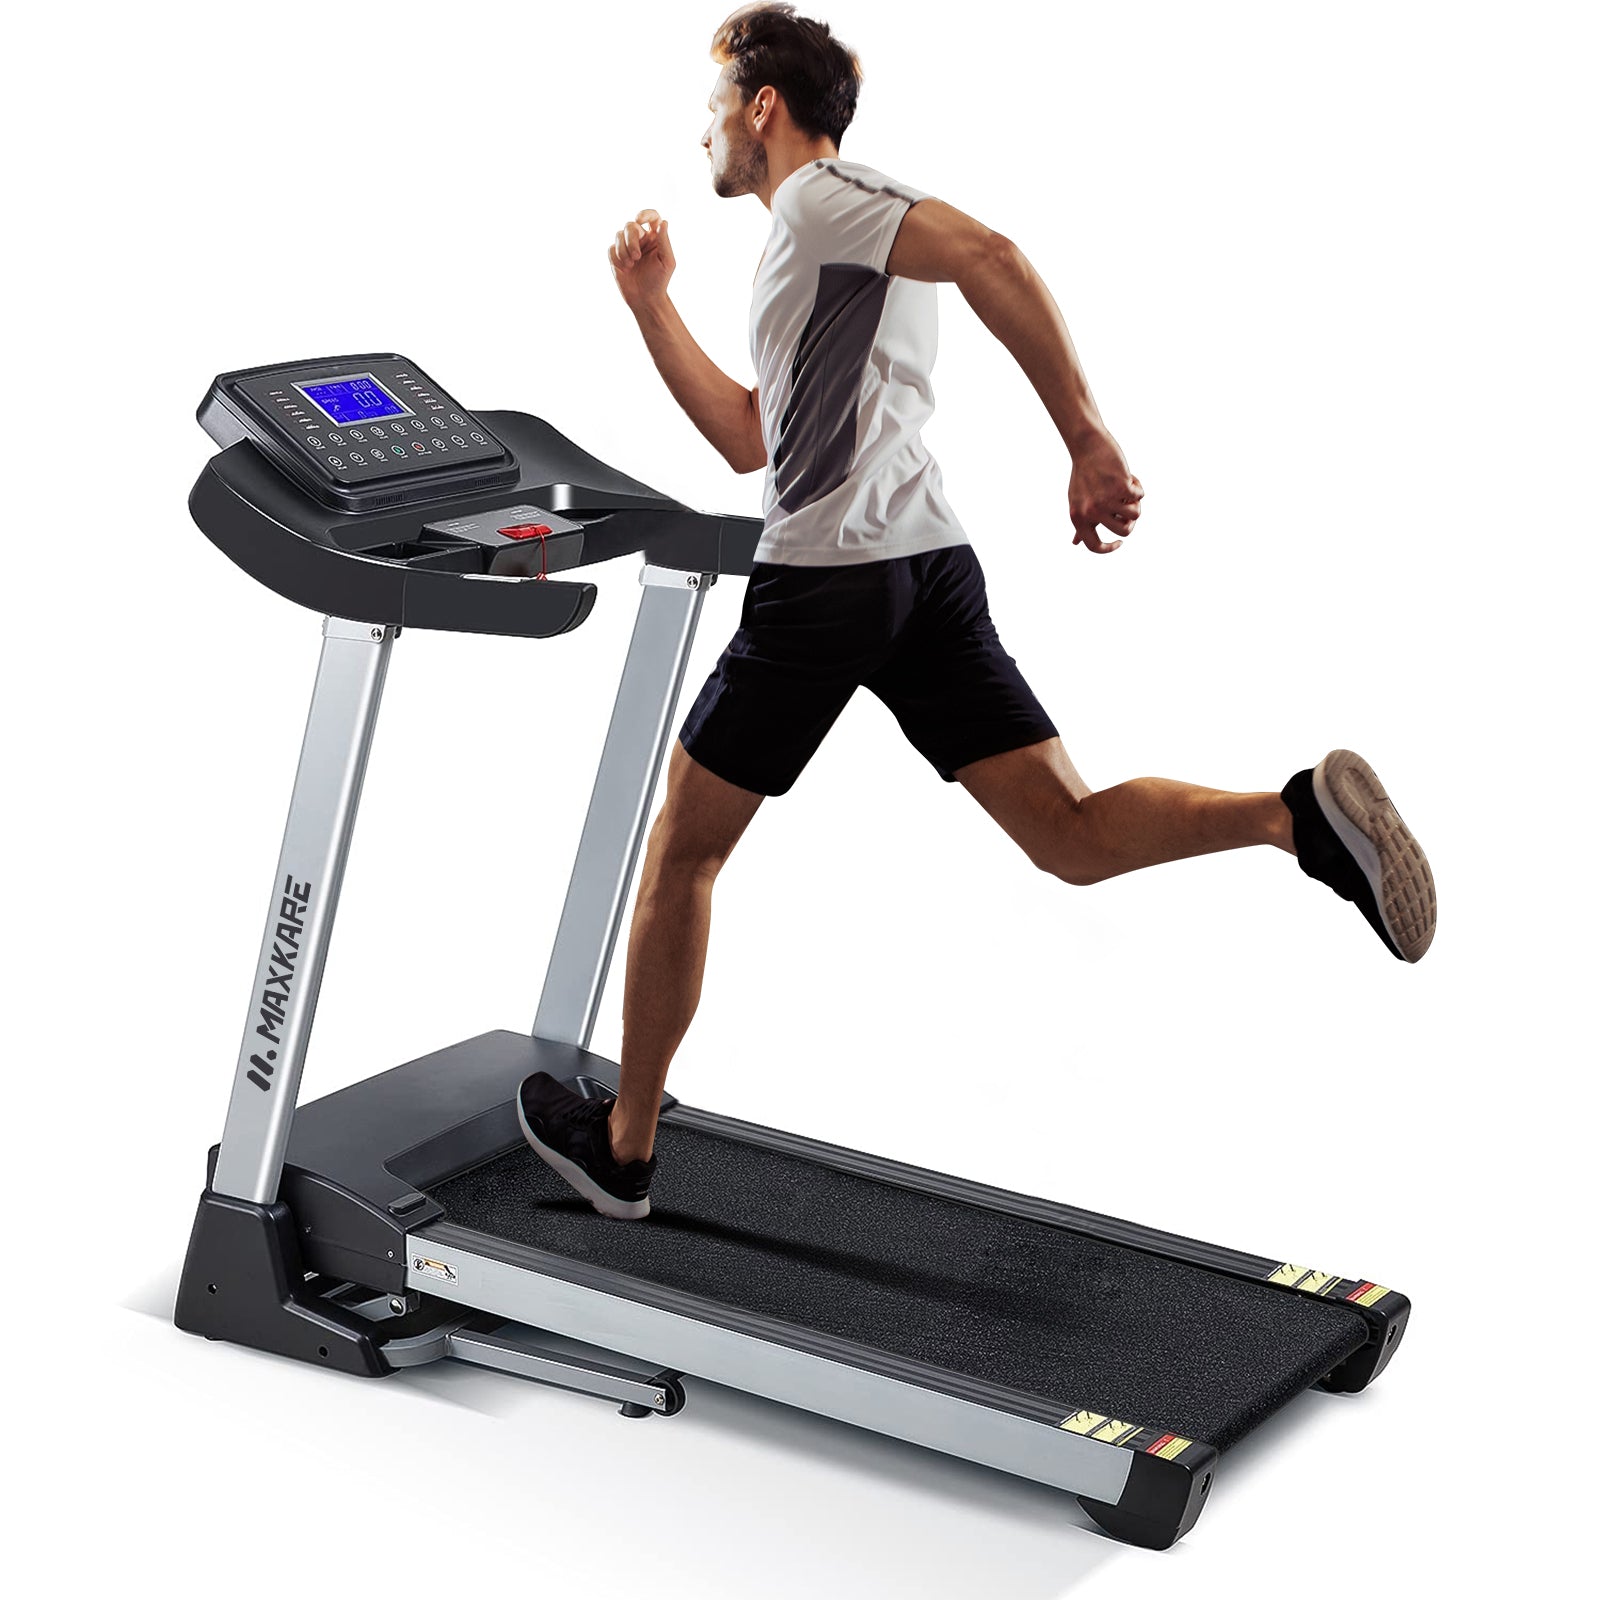 Load image into Gallery viewer, MaxKare Folding Electric Treadmill 2.5 HP Running Machine with Large LCD Display, 15 Preset Programs, 3 Manual Incline Treadmill
